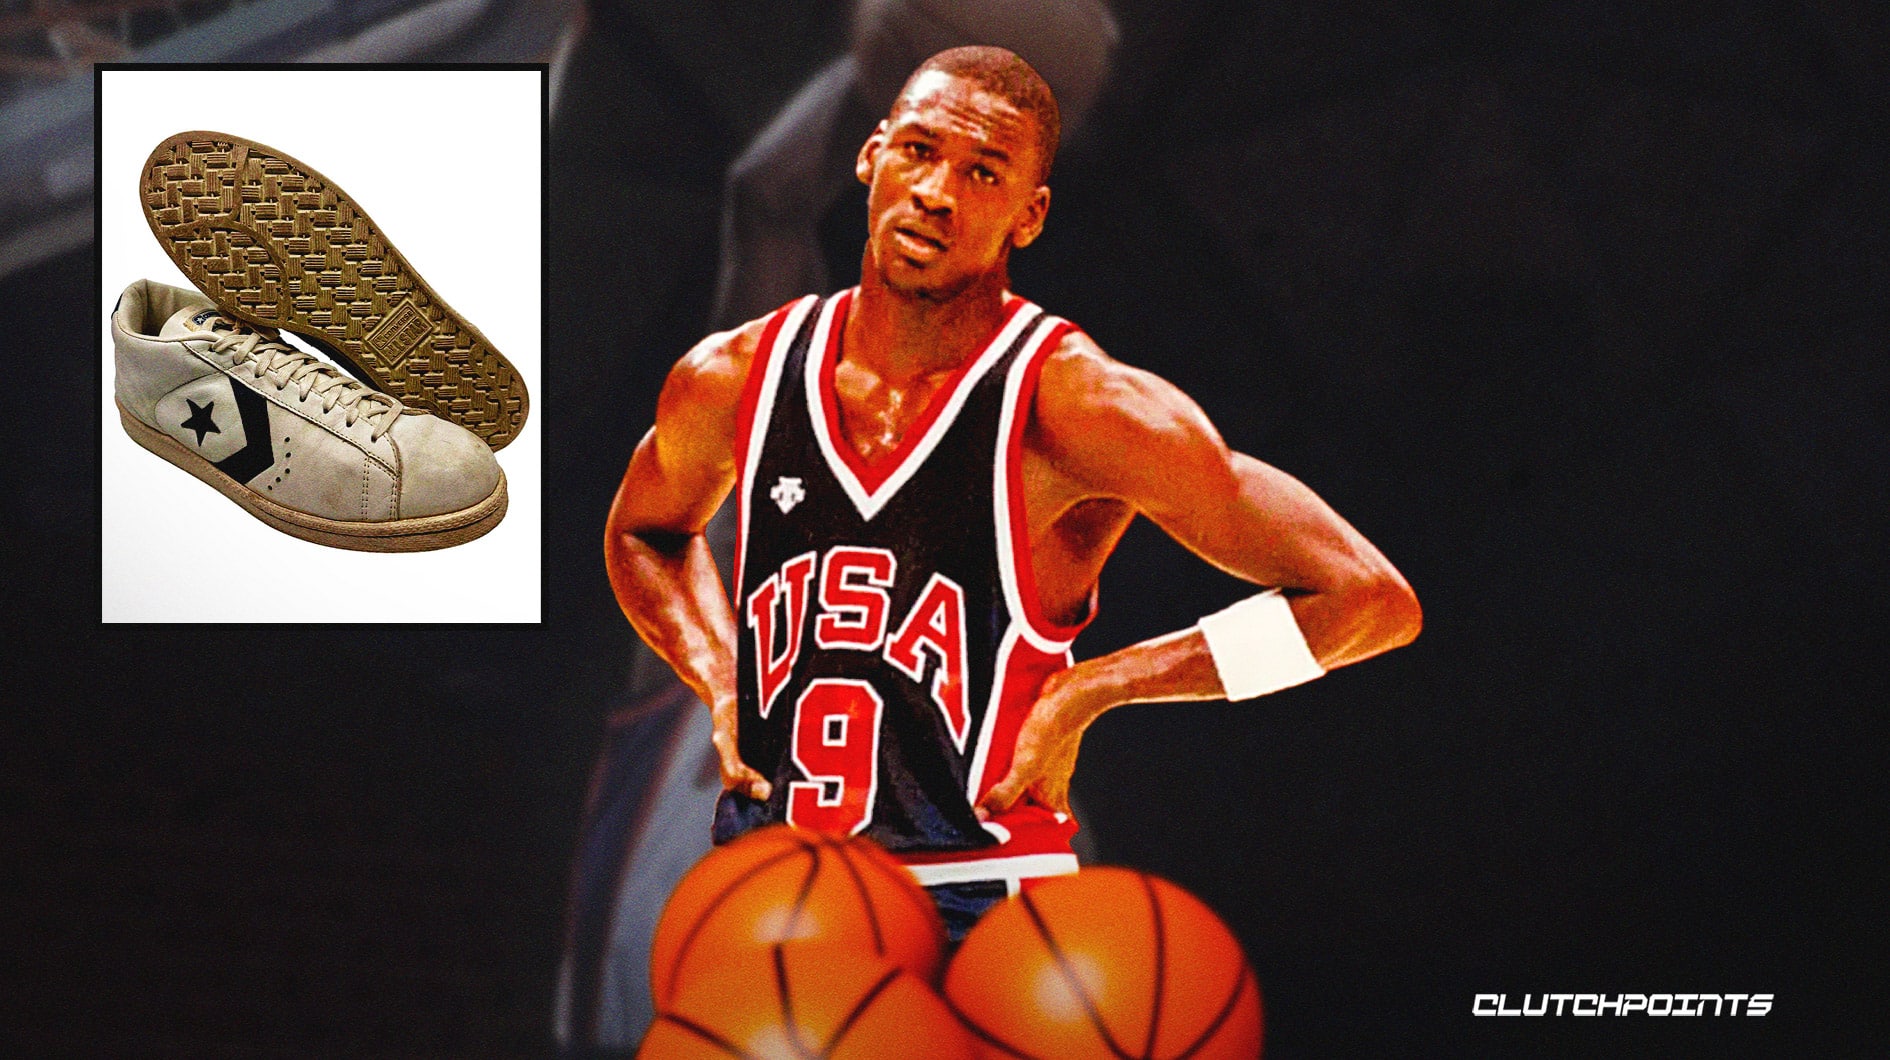 Michael Jordan's Game-Worn Converse From 1983 Listed in Auction